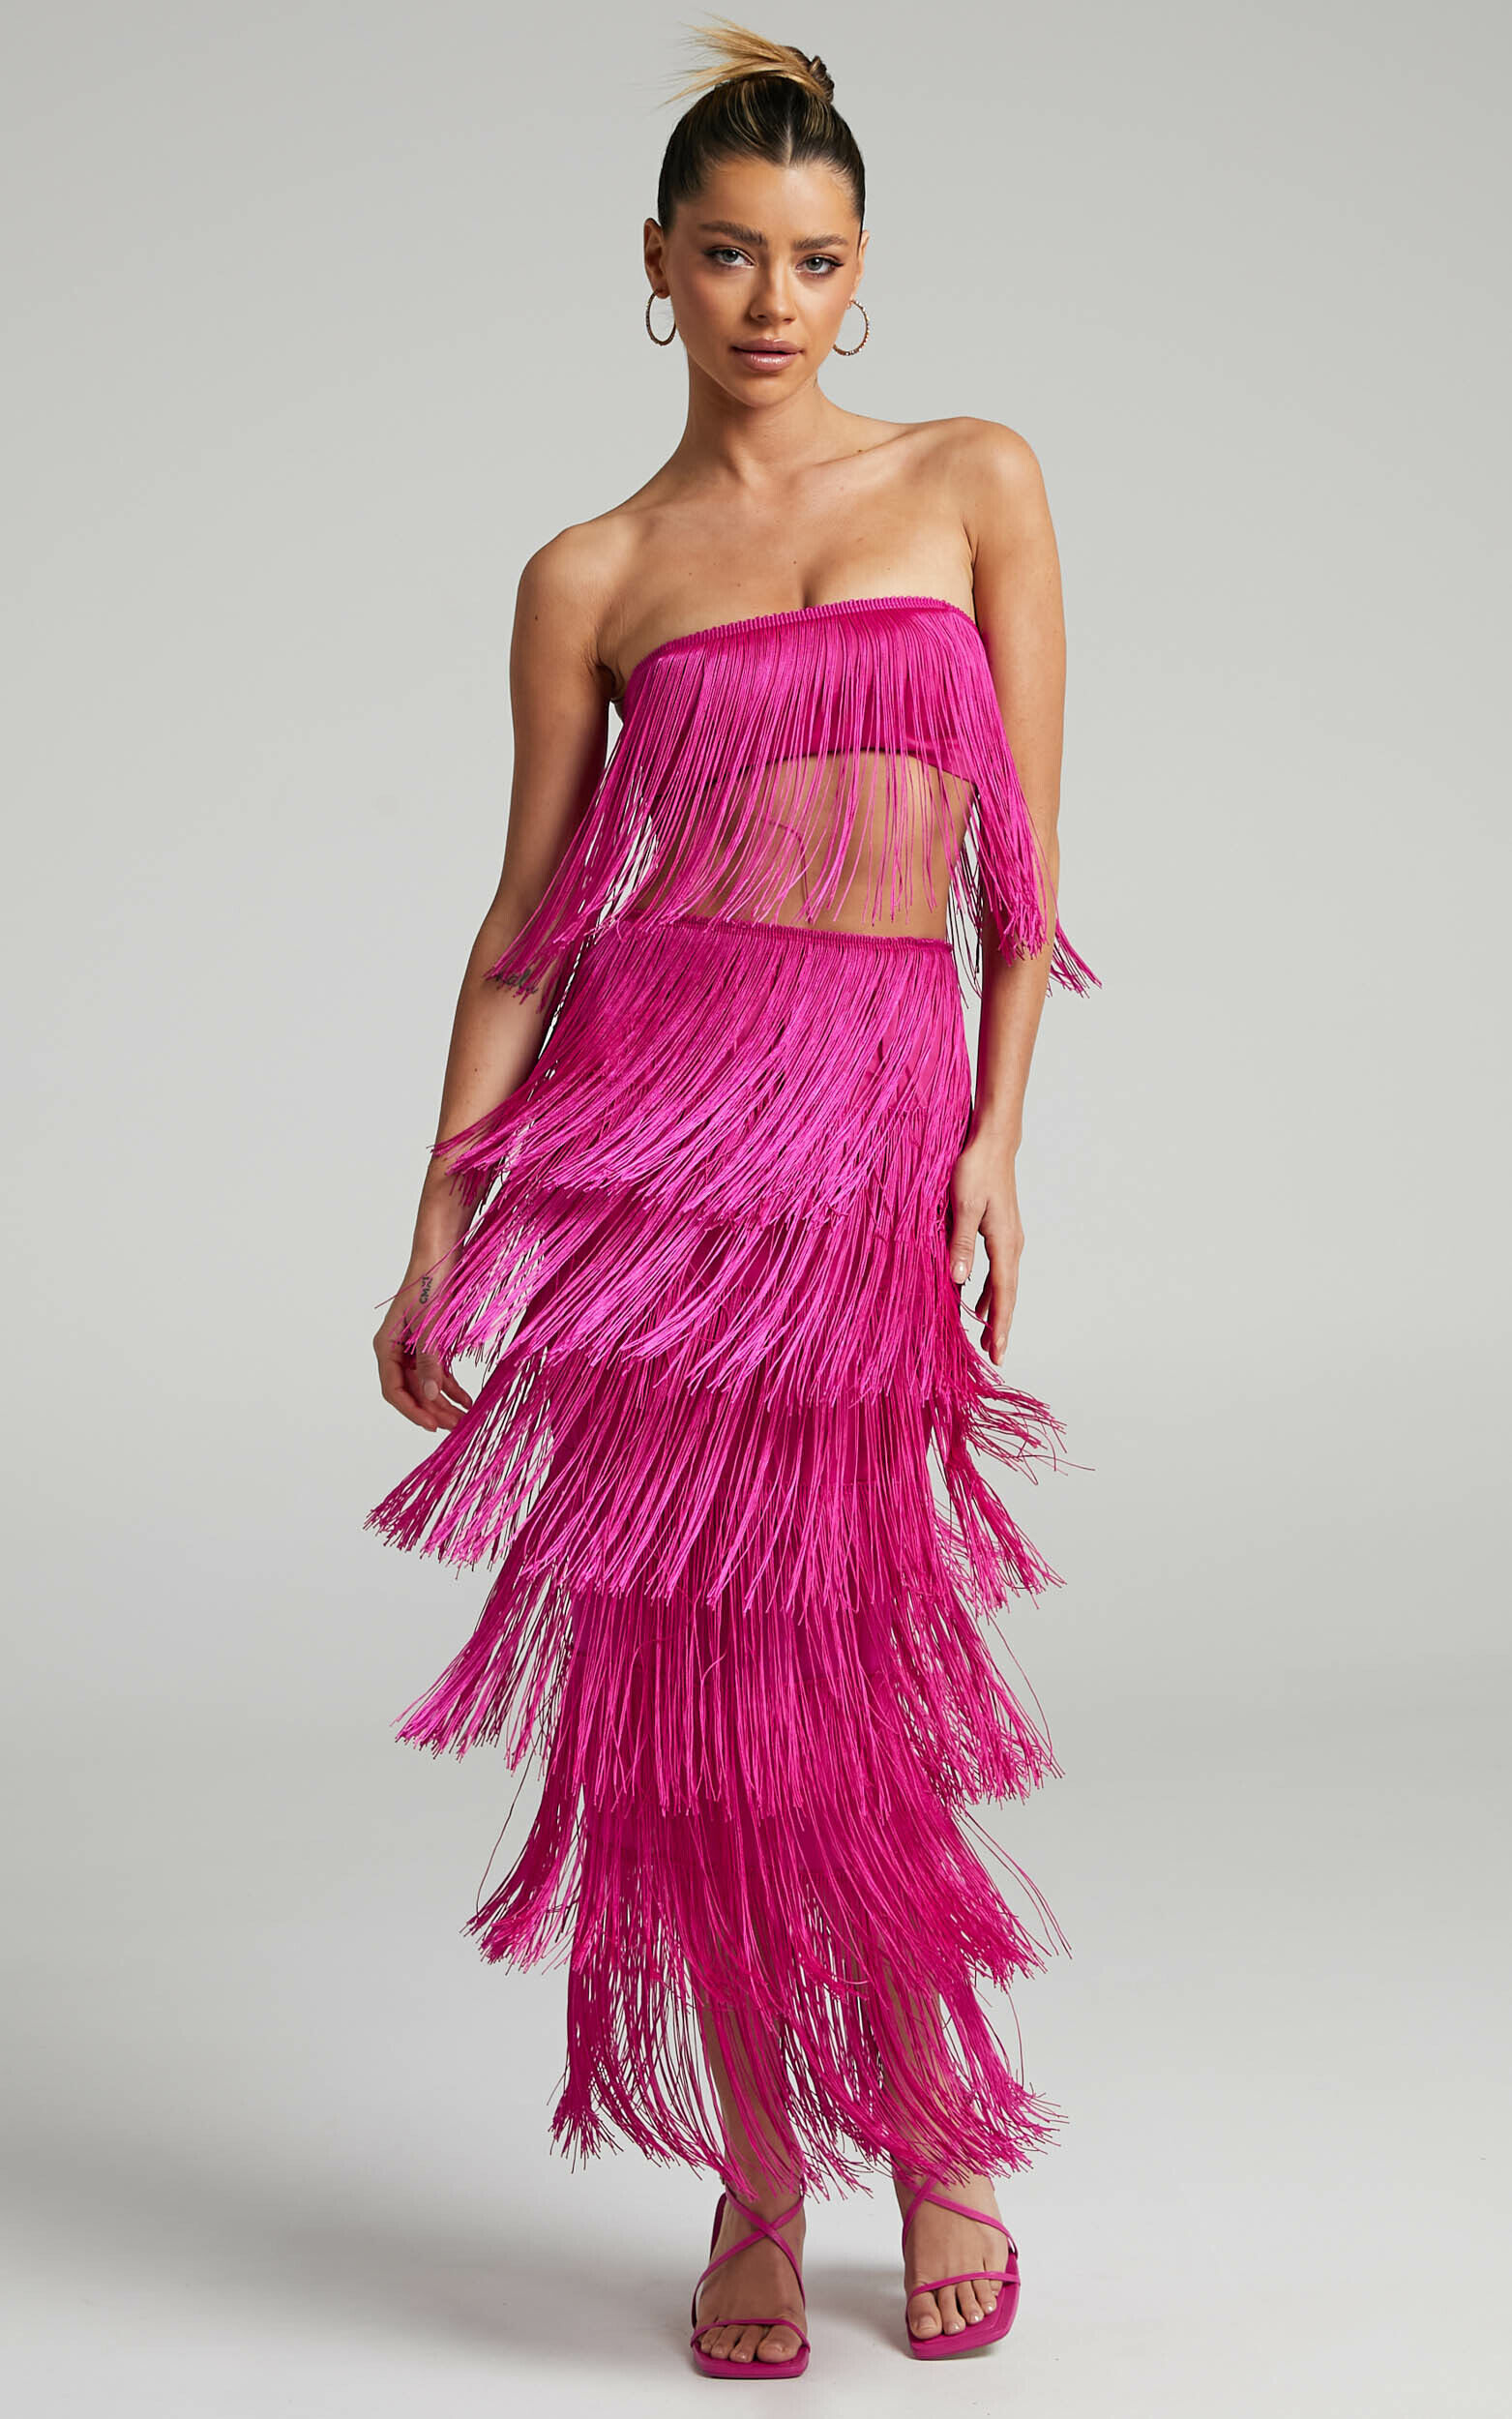 Amalee Two Piece Set - Fringe Strapless Crop Top and Midi Skirt Set in Pink